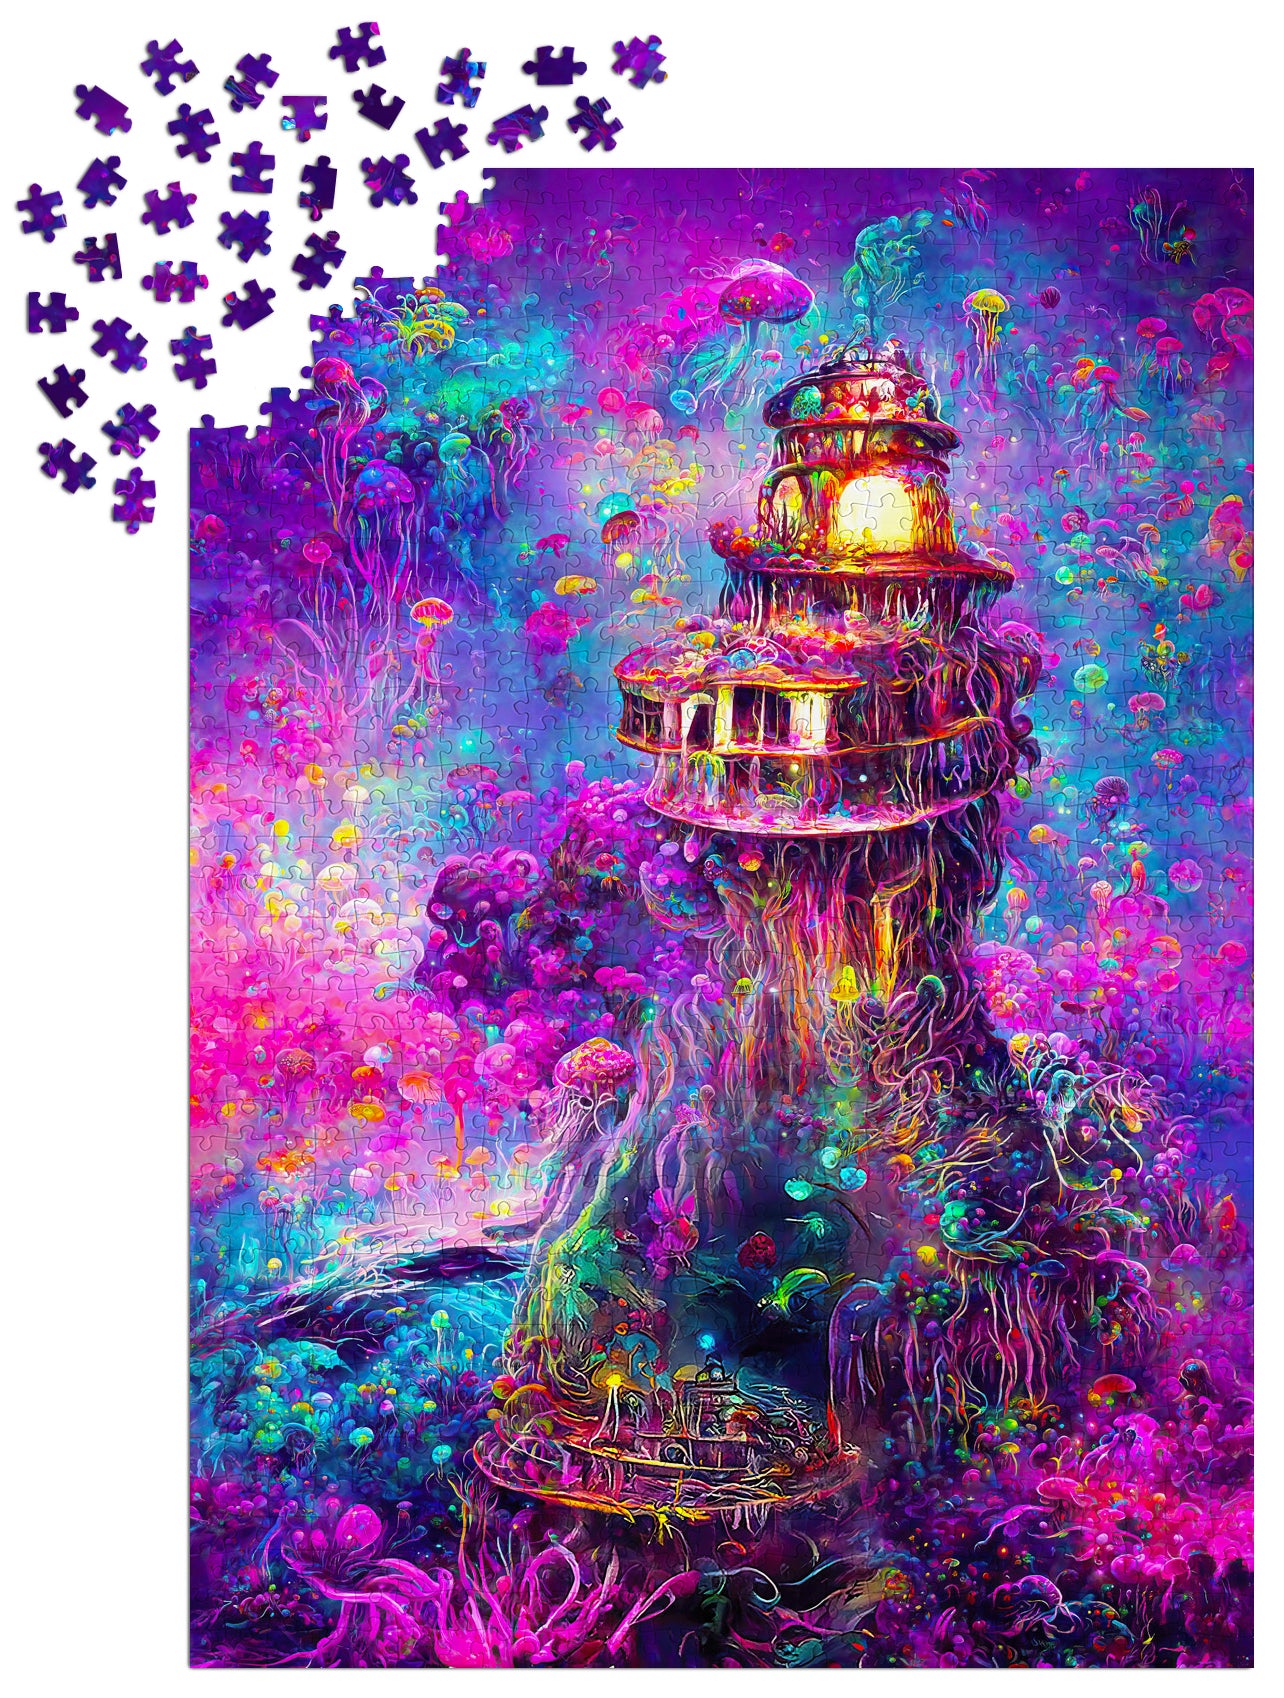 1000 Pieces Jigsaw Puzzle - Underwater Lighthouse (2216)